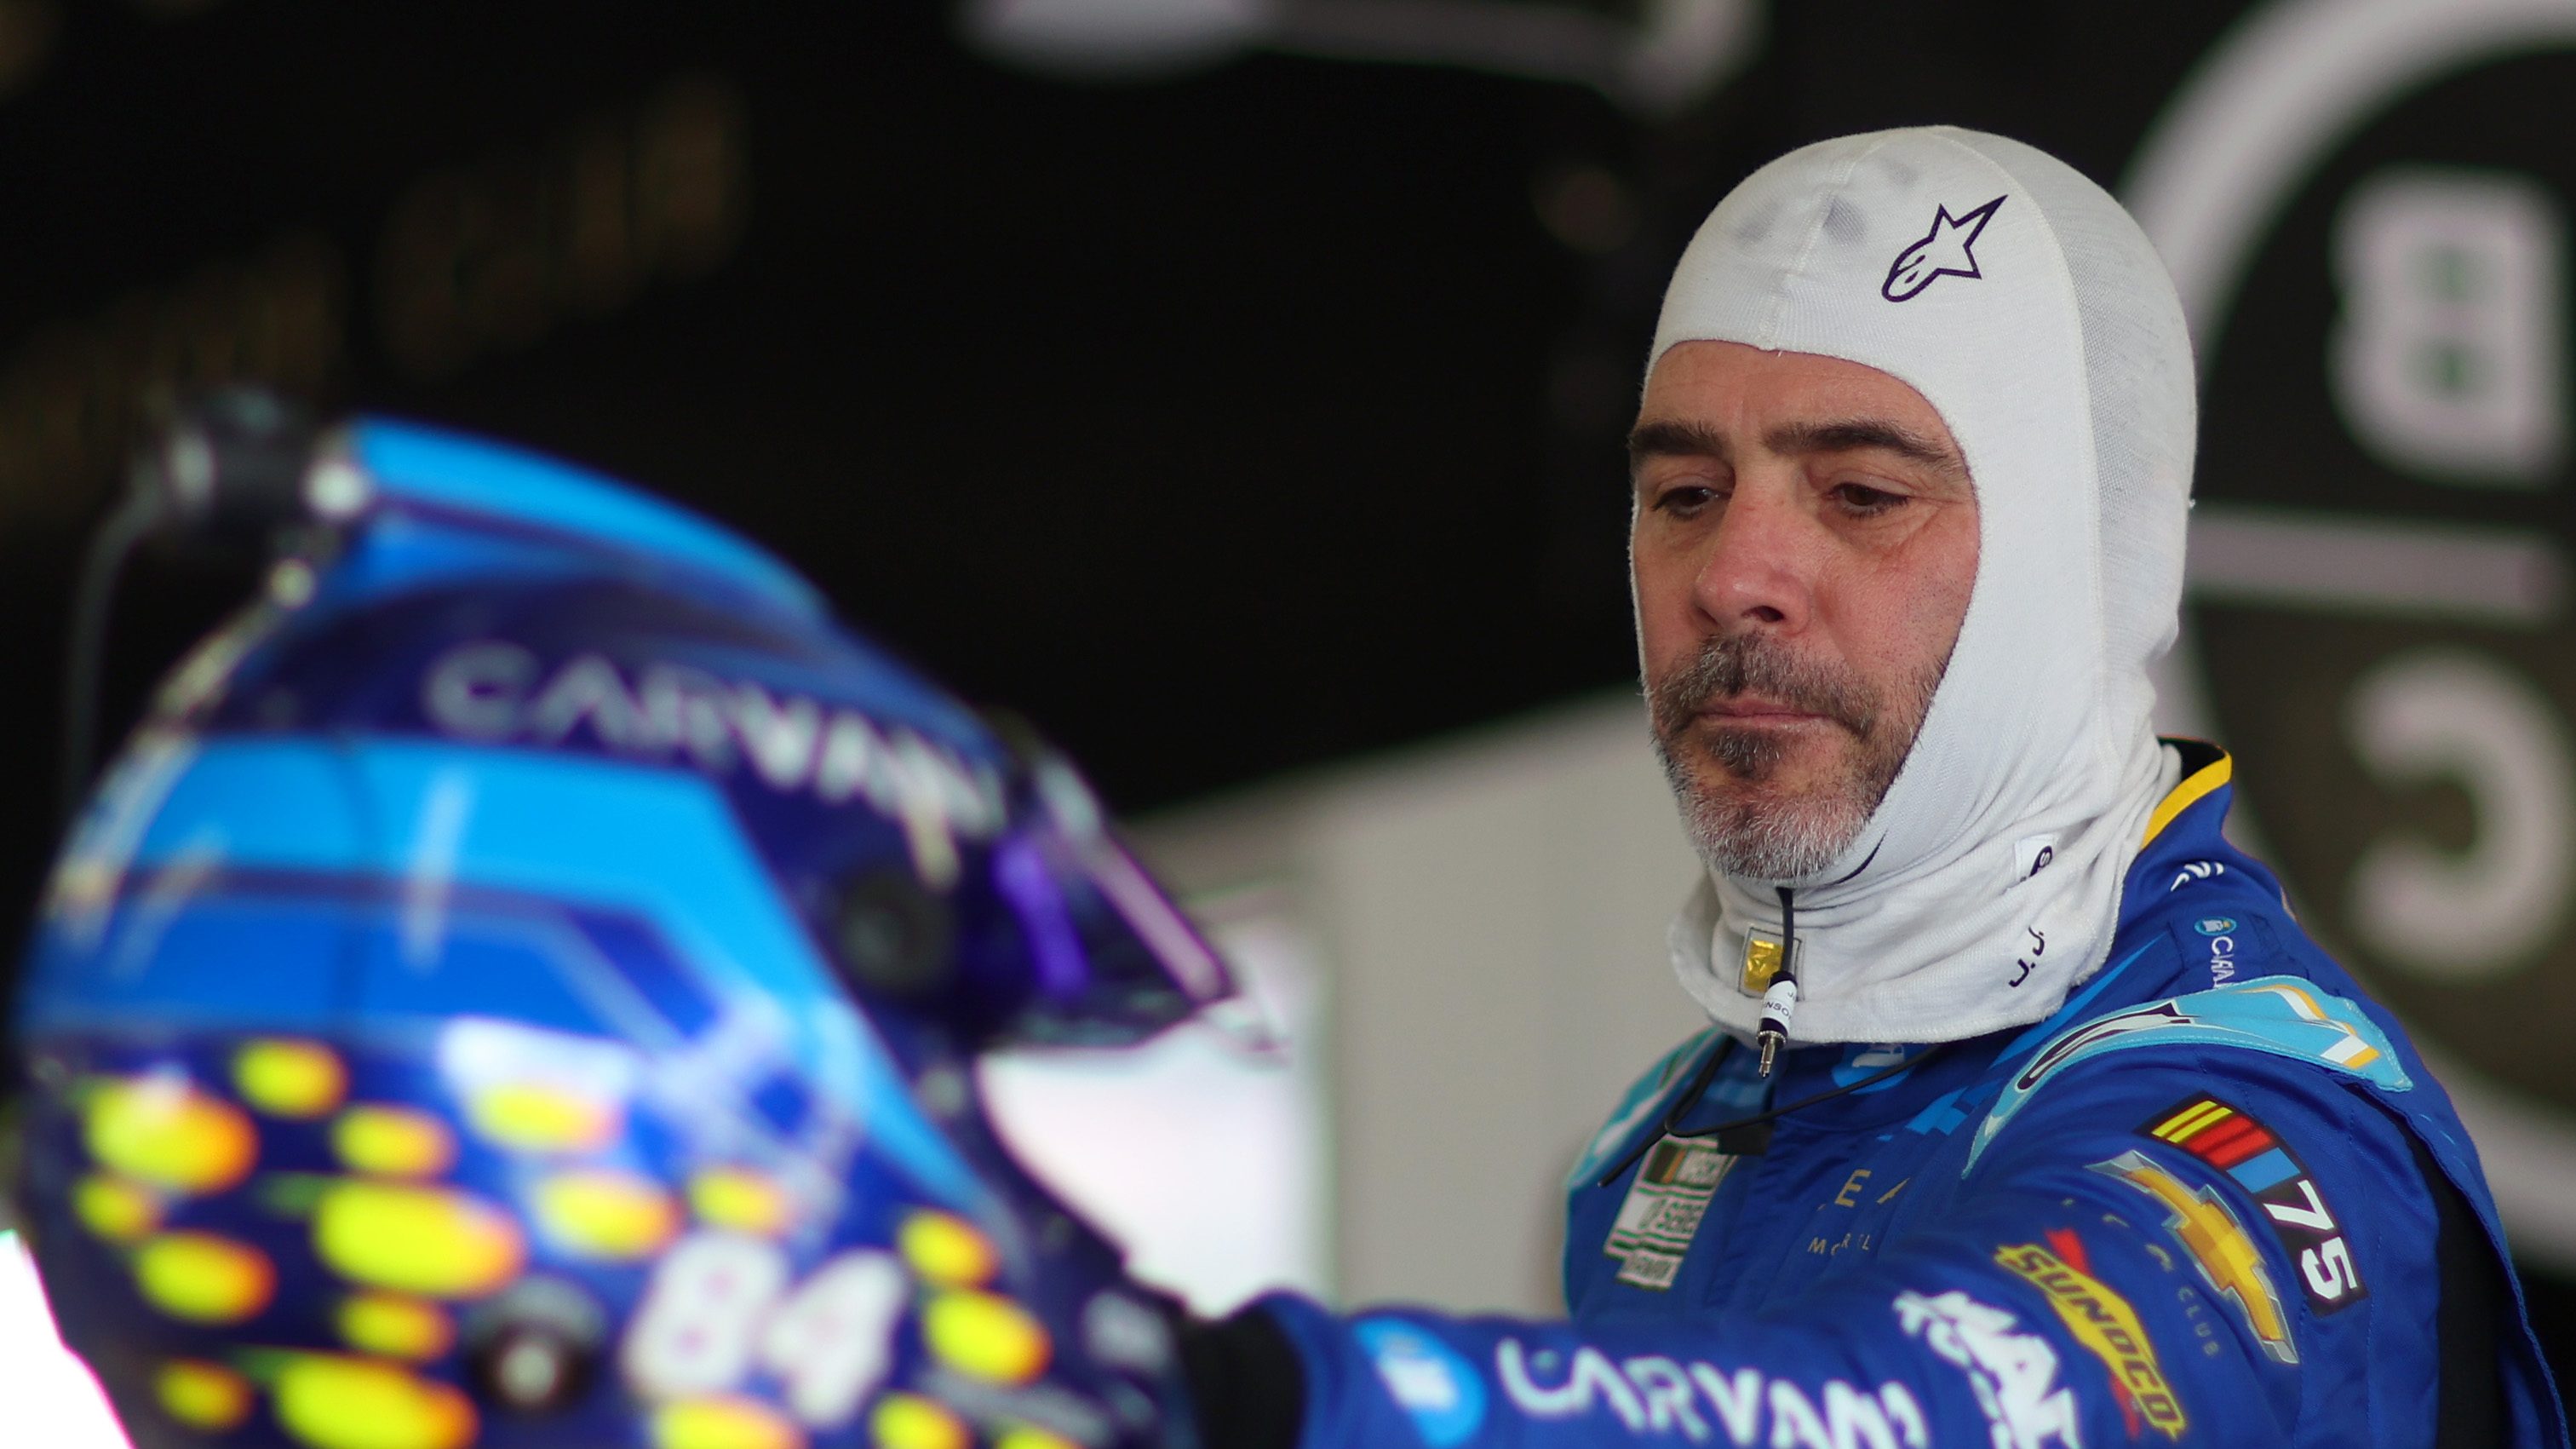 Jimmie Johnson Adds New Sponsor for 2 'Bucket List' Races